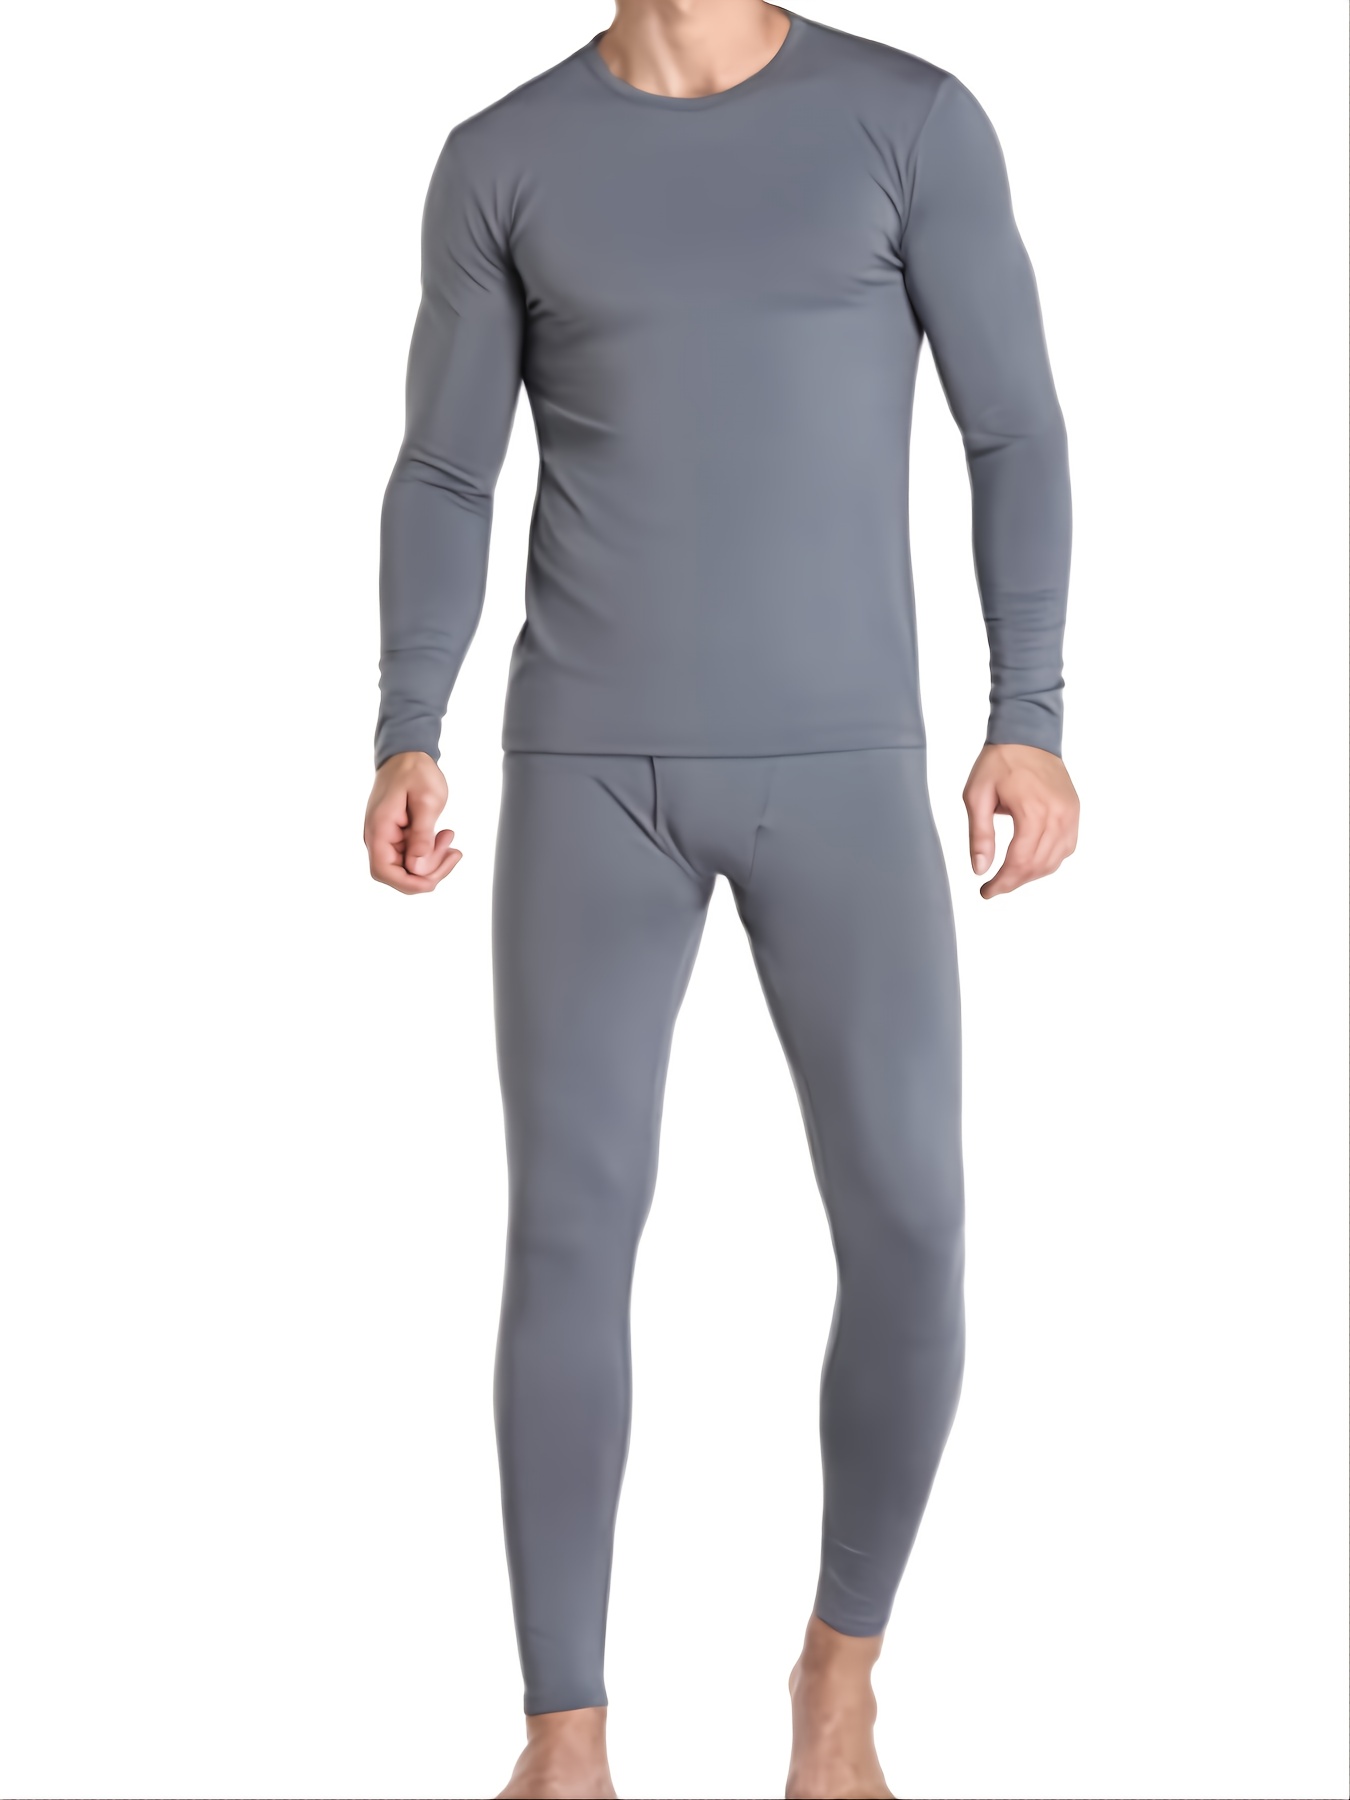 Long Johns for Men Thermal Set Big and Tall Long Underwear Warm Base Layer  Mens Thermals Top and Bottom Set(GY1,Medium) at  Men's Clothing store